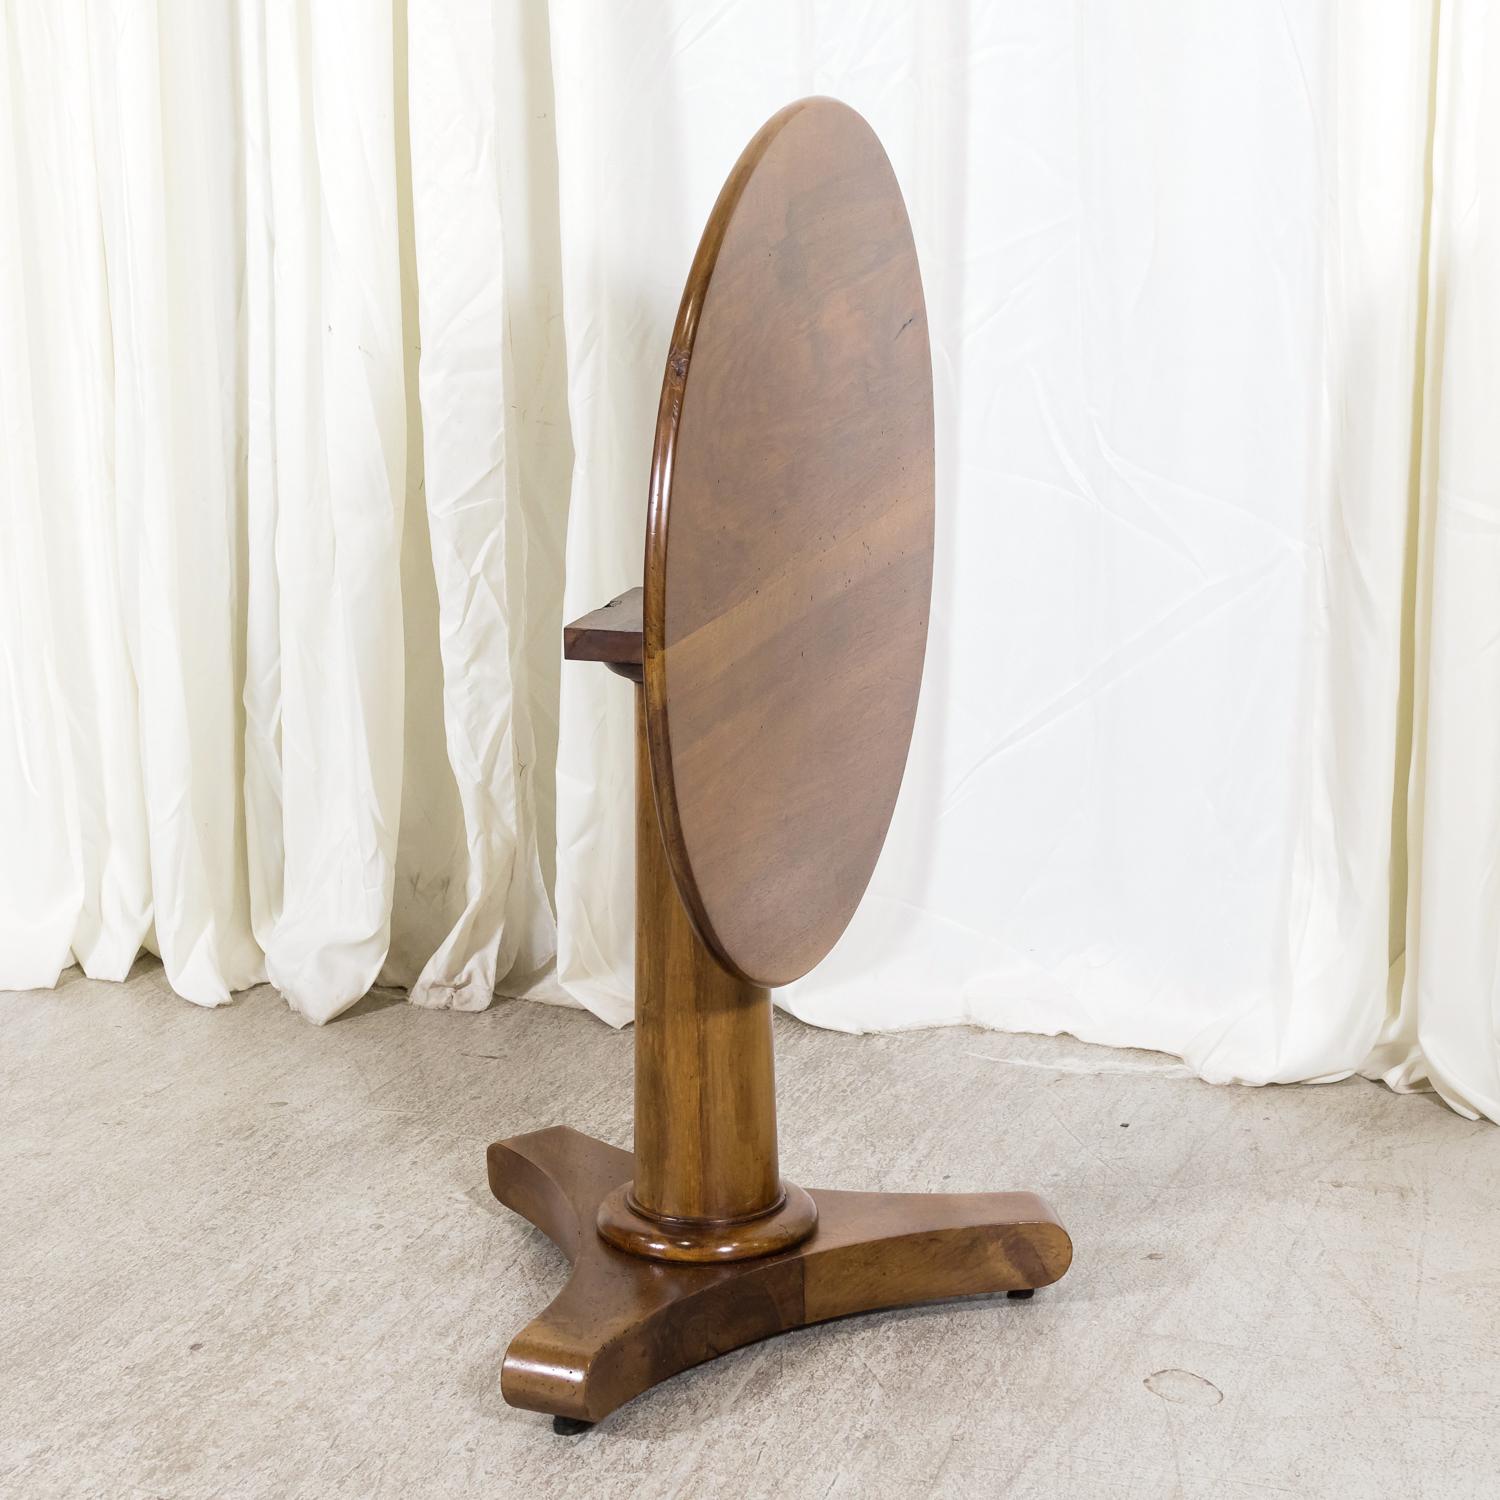 A handsome 19th century French Empire period tilt top gueridon side table or center table handcrafted of solid walnut in the South of France, circa early 1800s. This antique table features a round top raised on a tapered column support and tripod